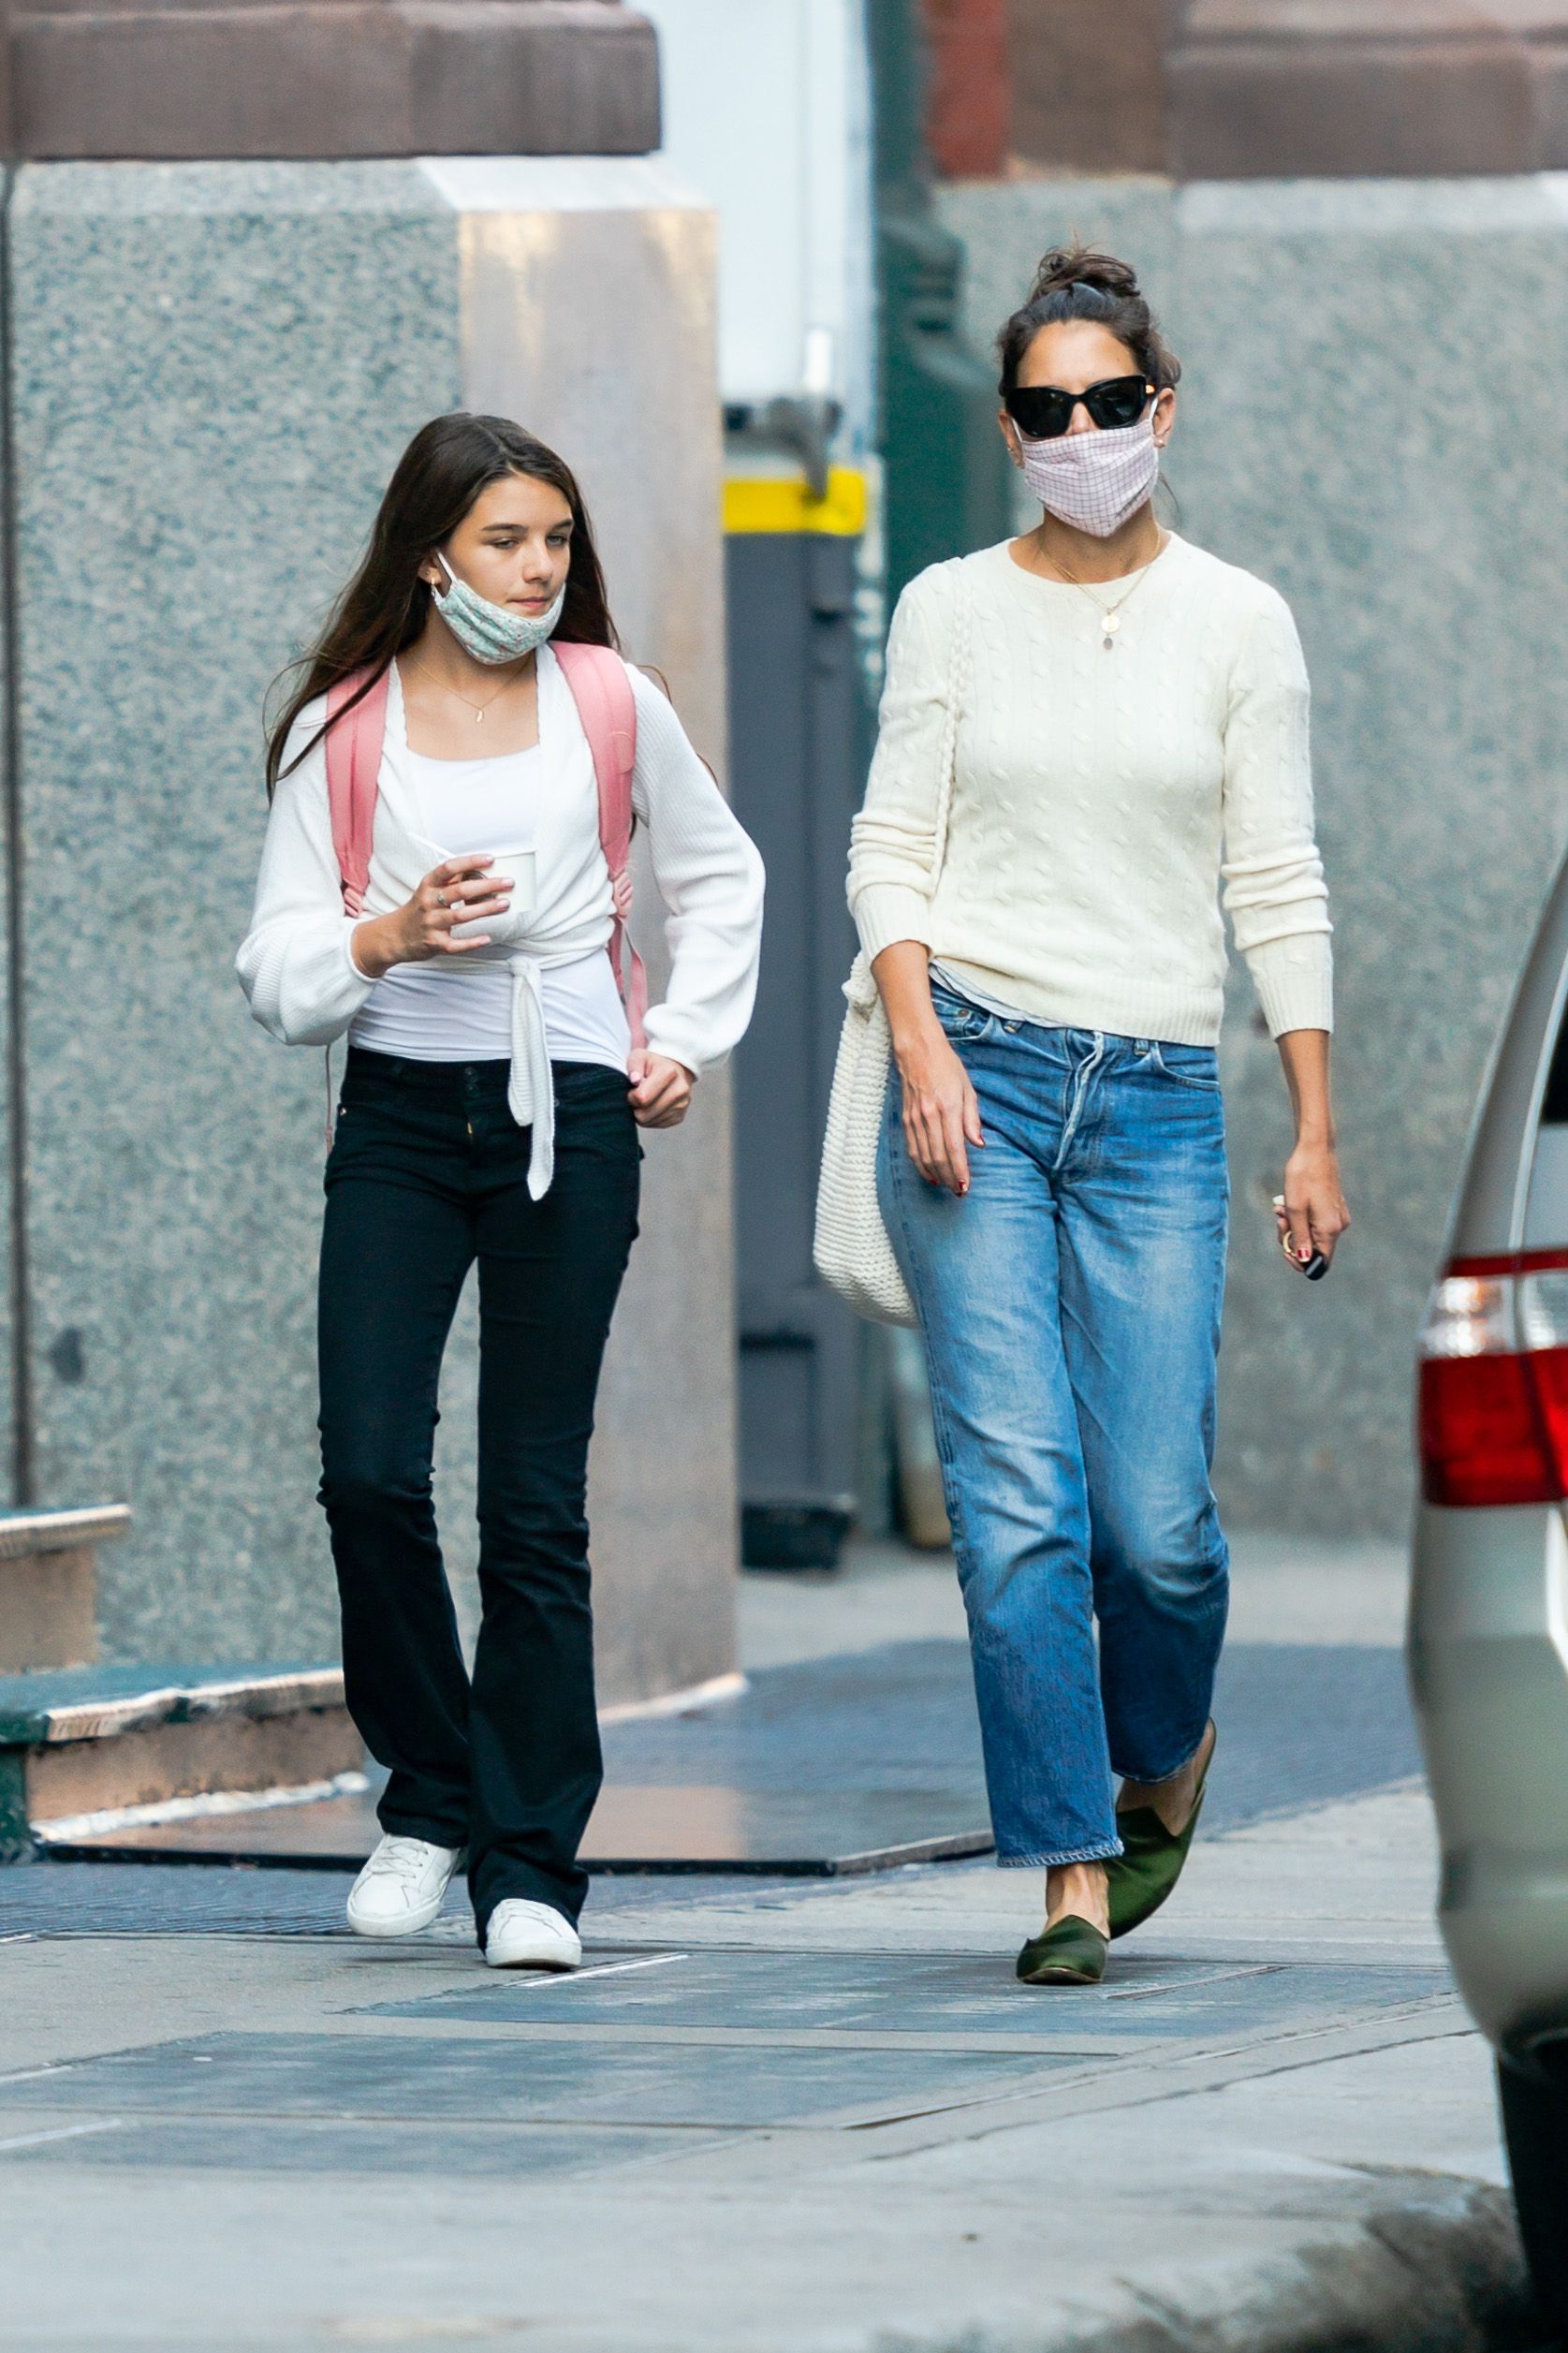 Suri Cruise and Katie Holmes in New York City on September 08, 2020. | Source: Getty Images